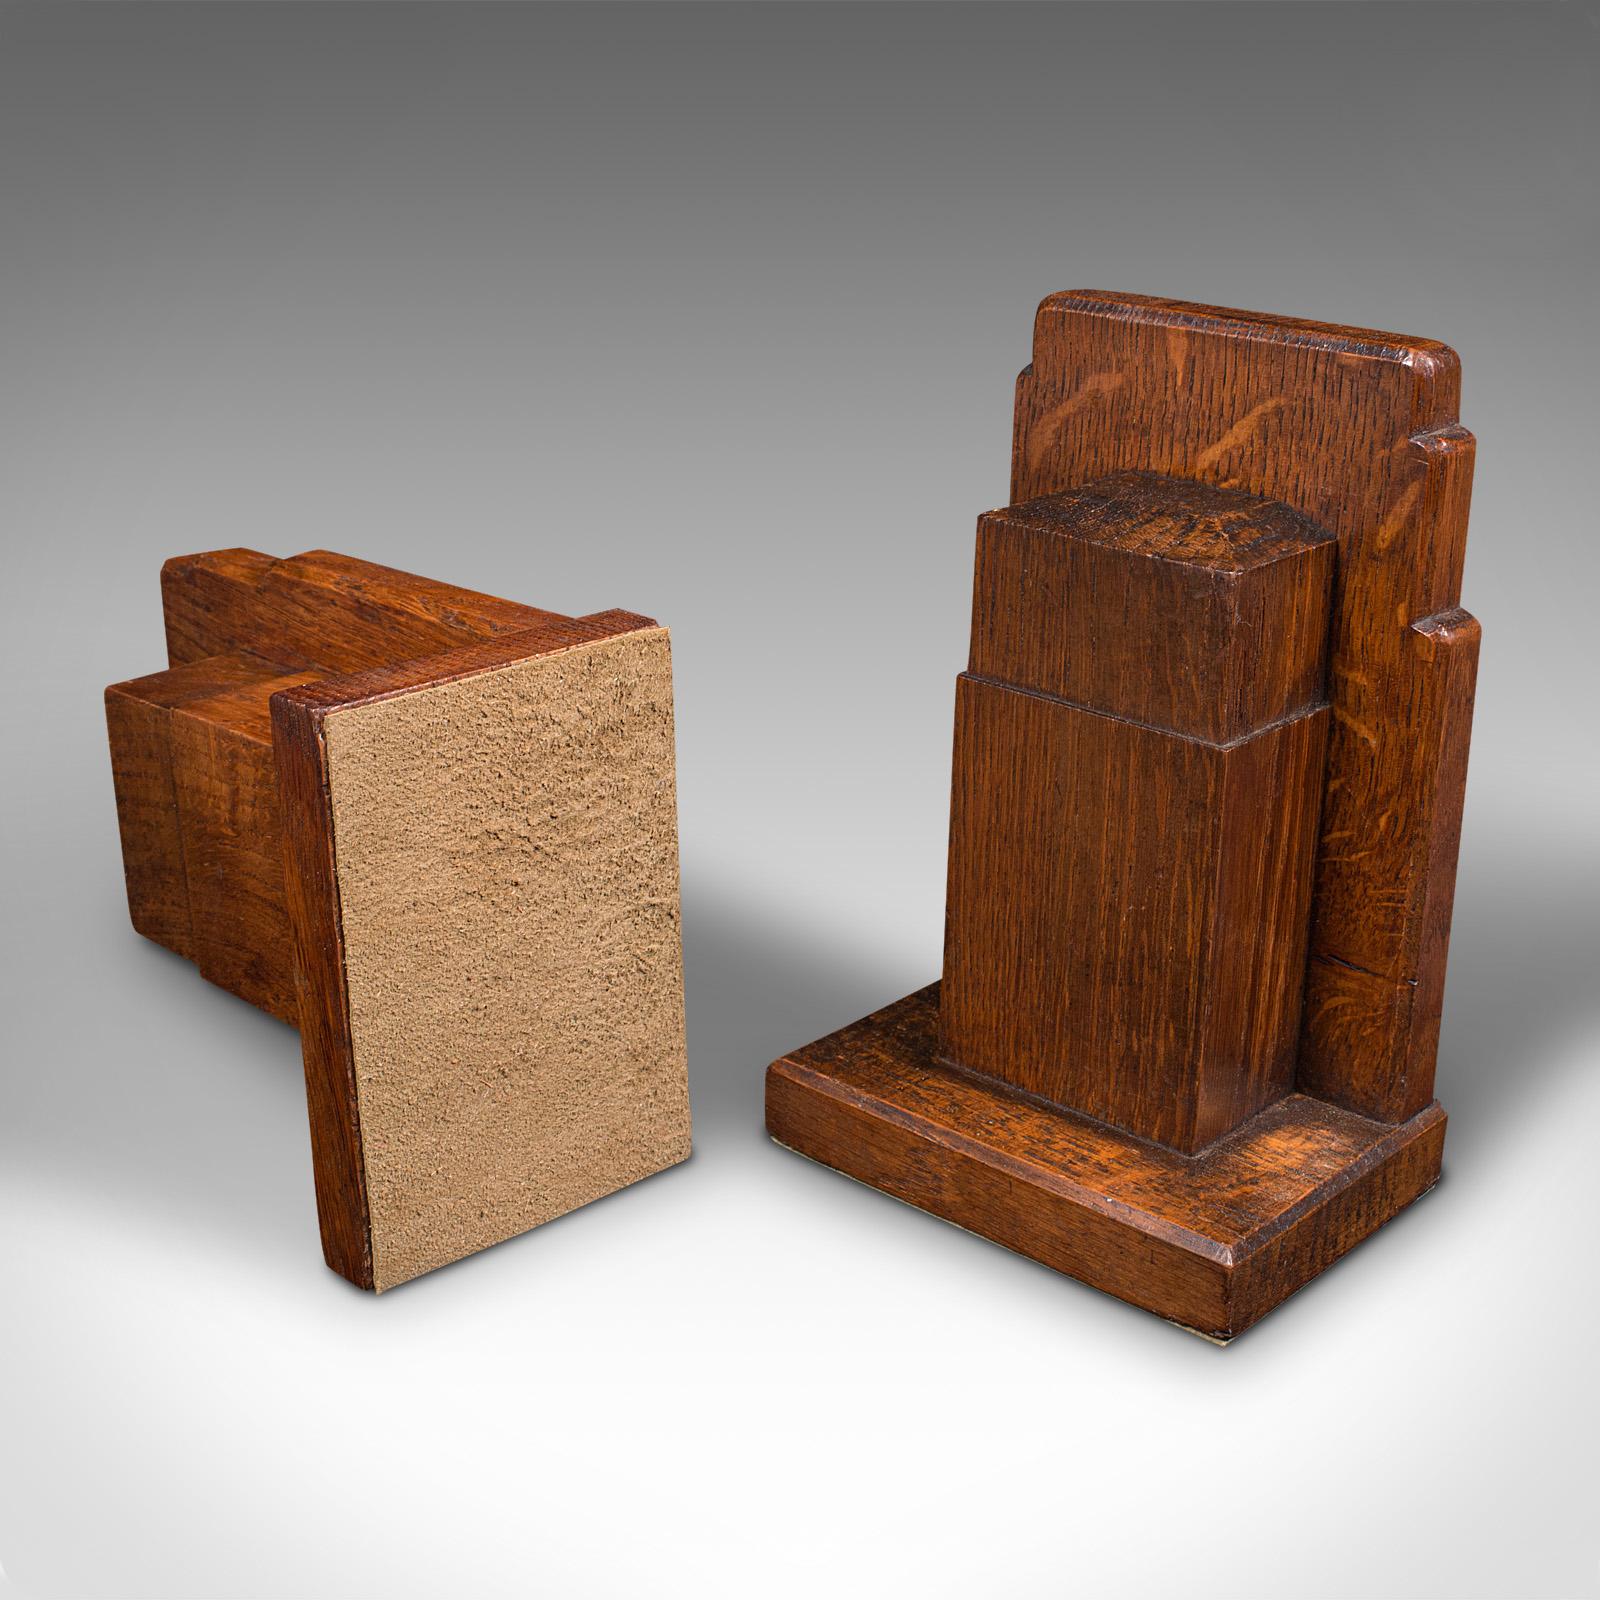 Pair of Vintage Decorative Bookends, English, Oak, Book Rest, Early 20th, C.1930 For Sale 2